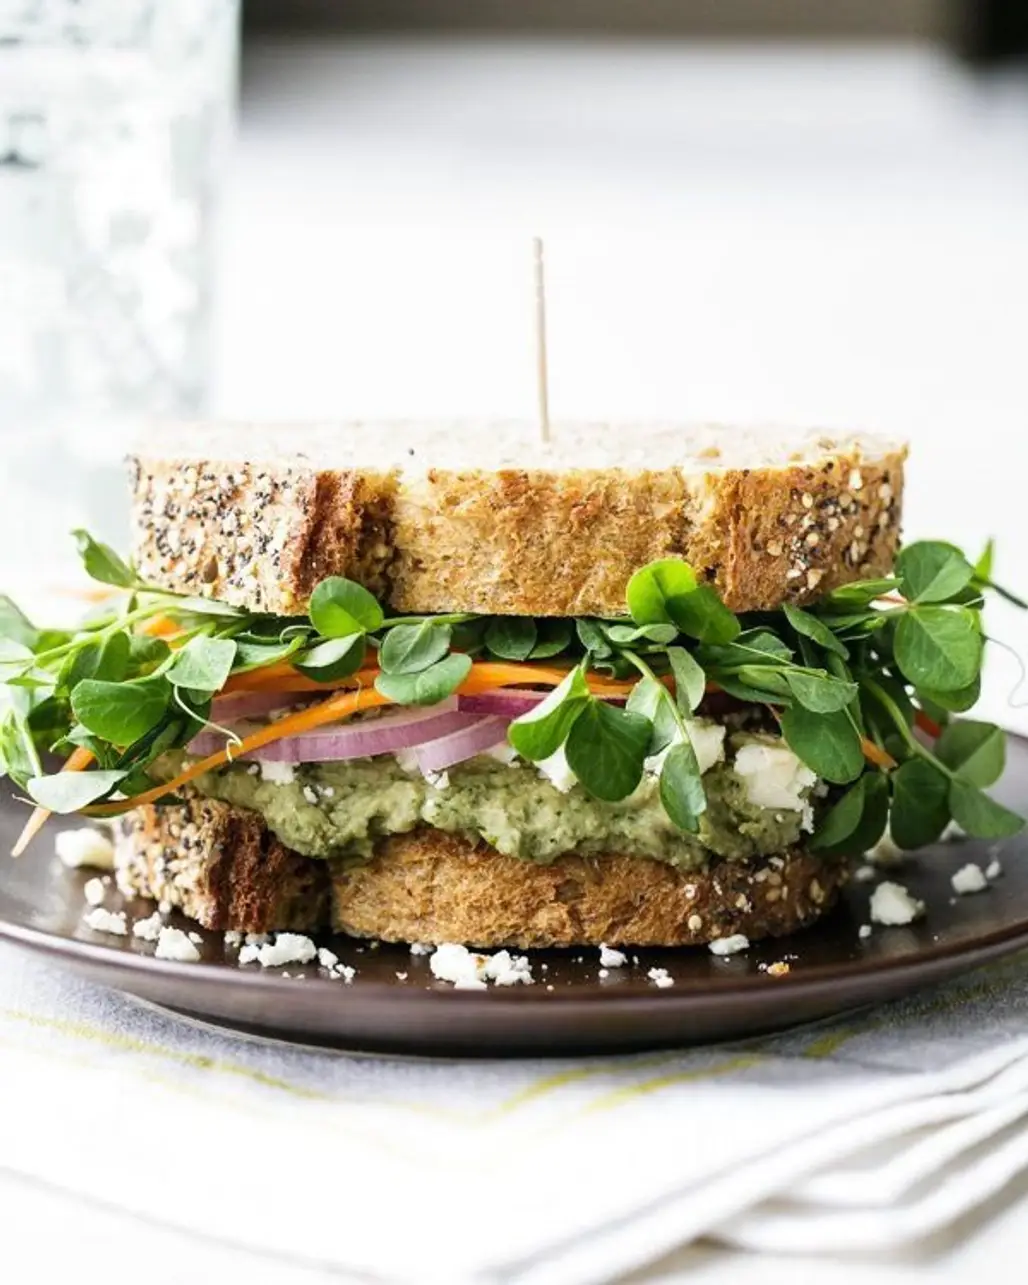 A Sandwich That's Light, Healthy, and Oh so Flavorful!